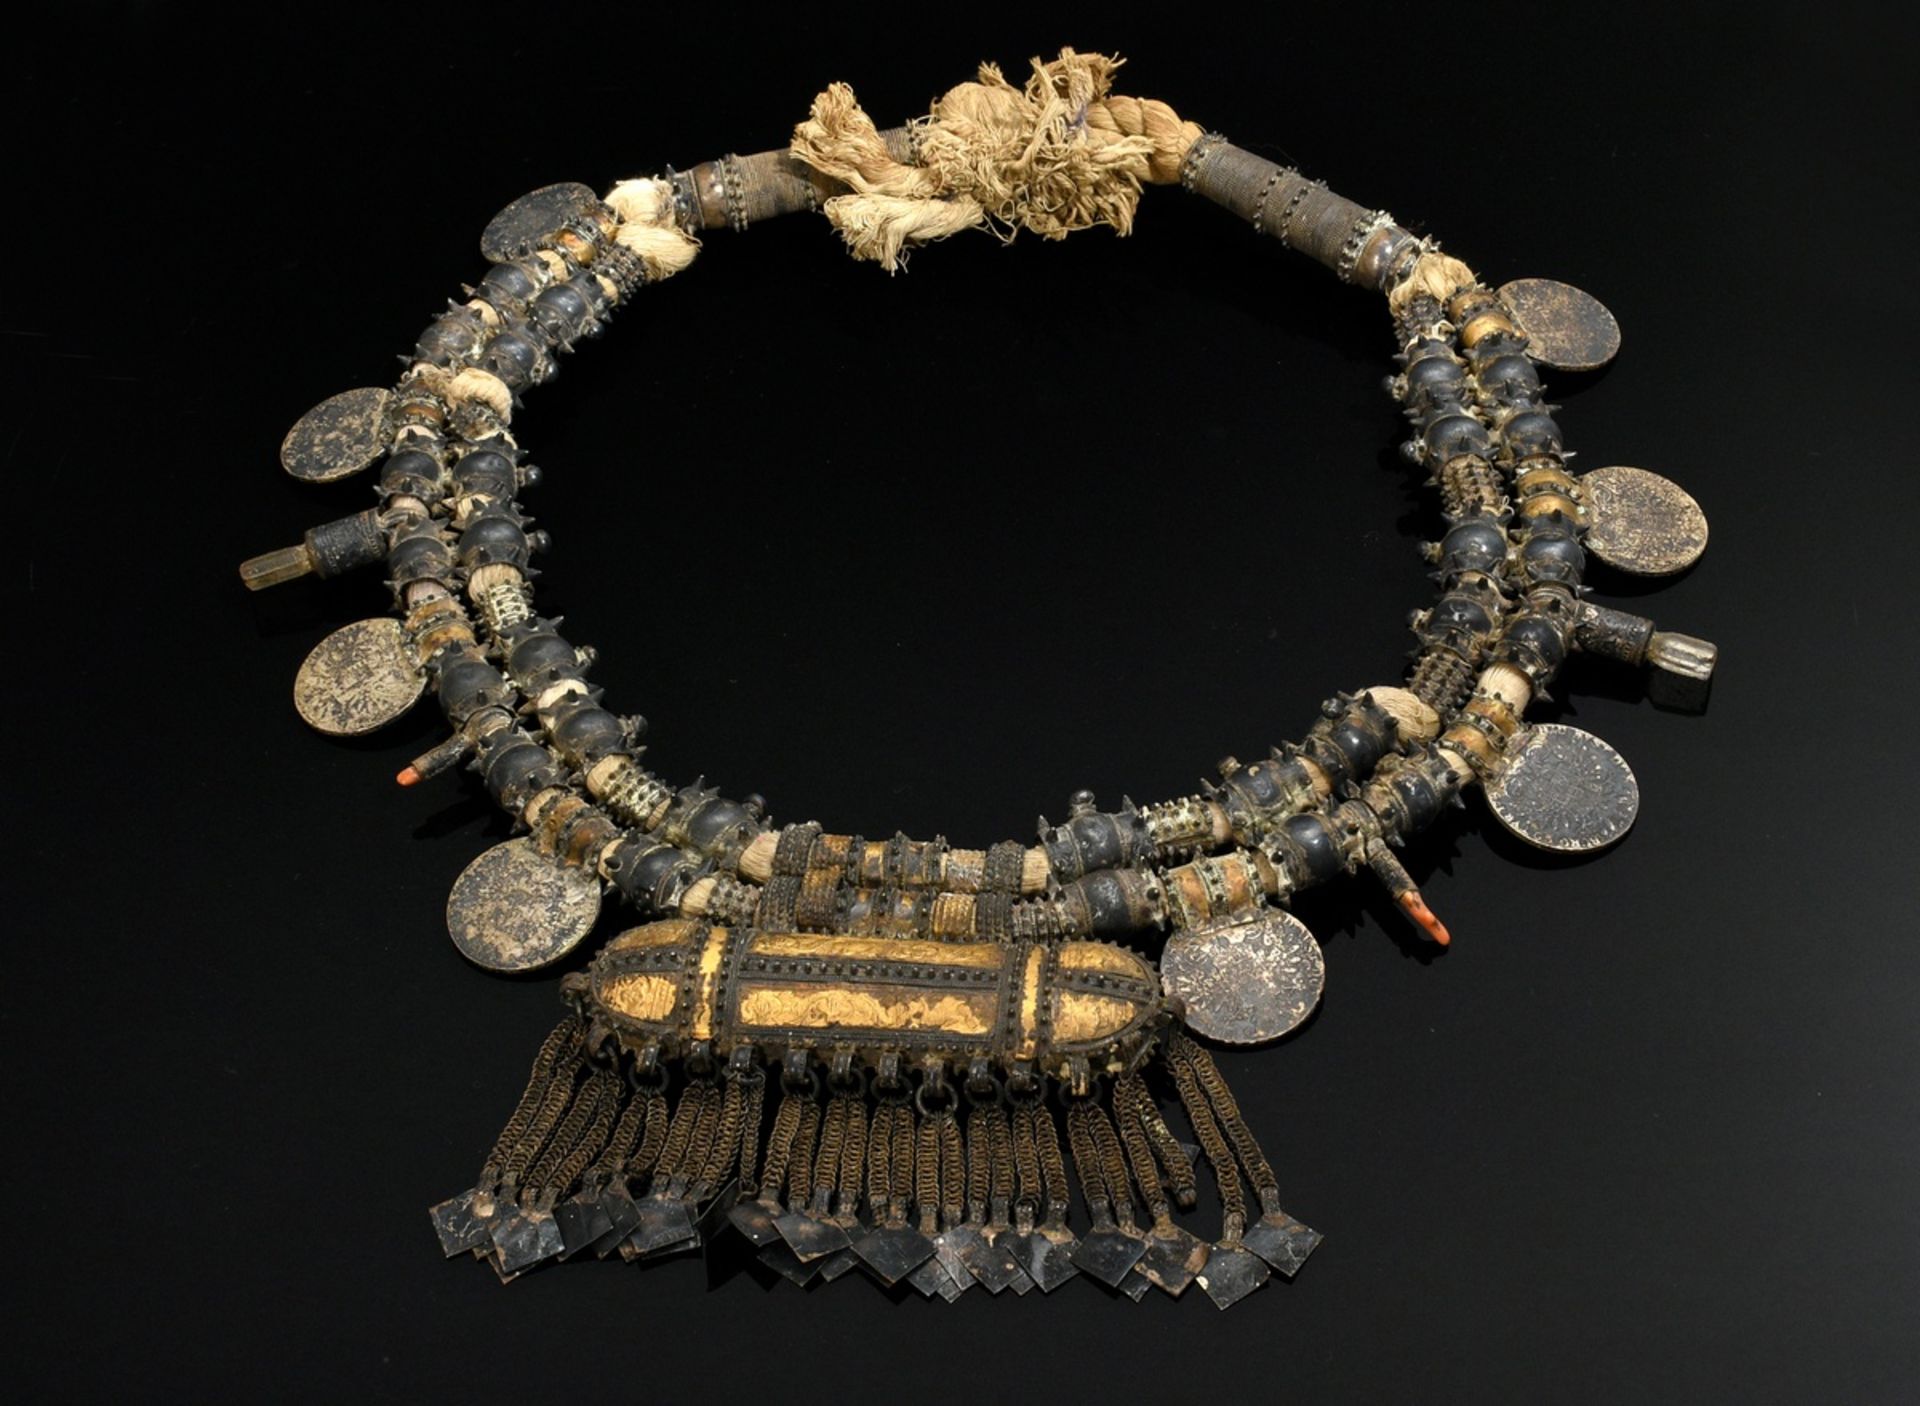 2 Various necklaces "Hirz" or "Sumpt", Oman Wahiba sand Bedouins, large spiked beads with Maria The - Image 14 of 14